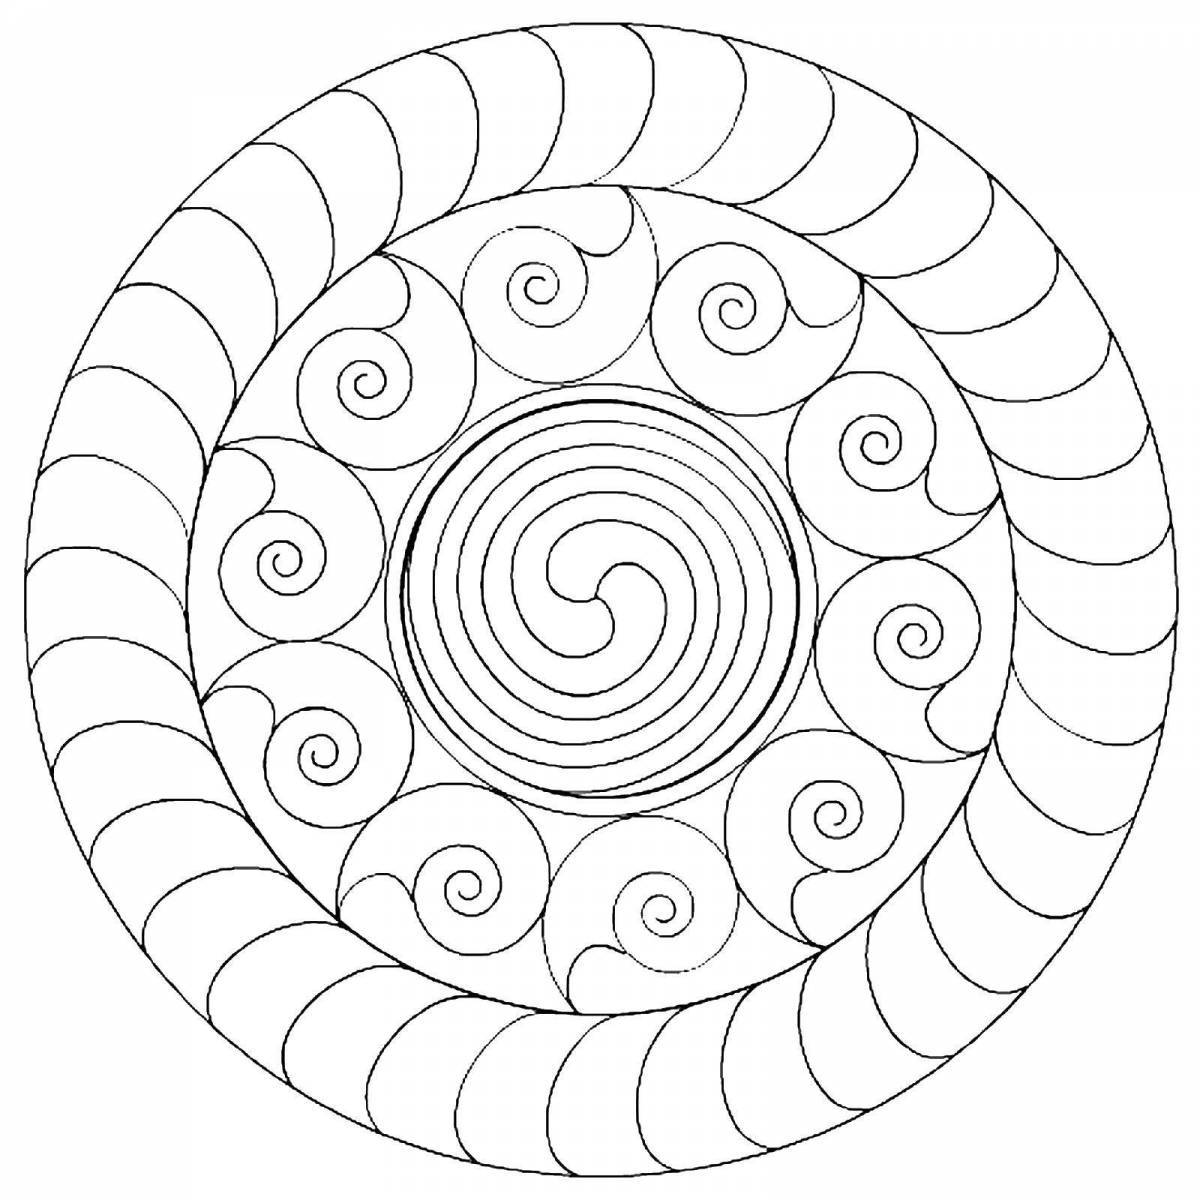 Artistic spiral coloring